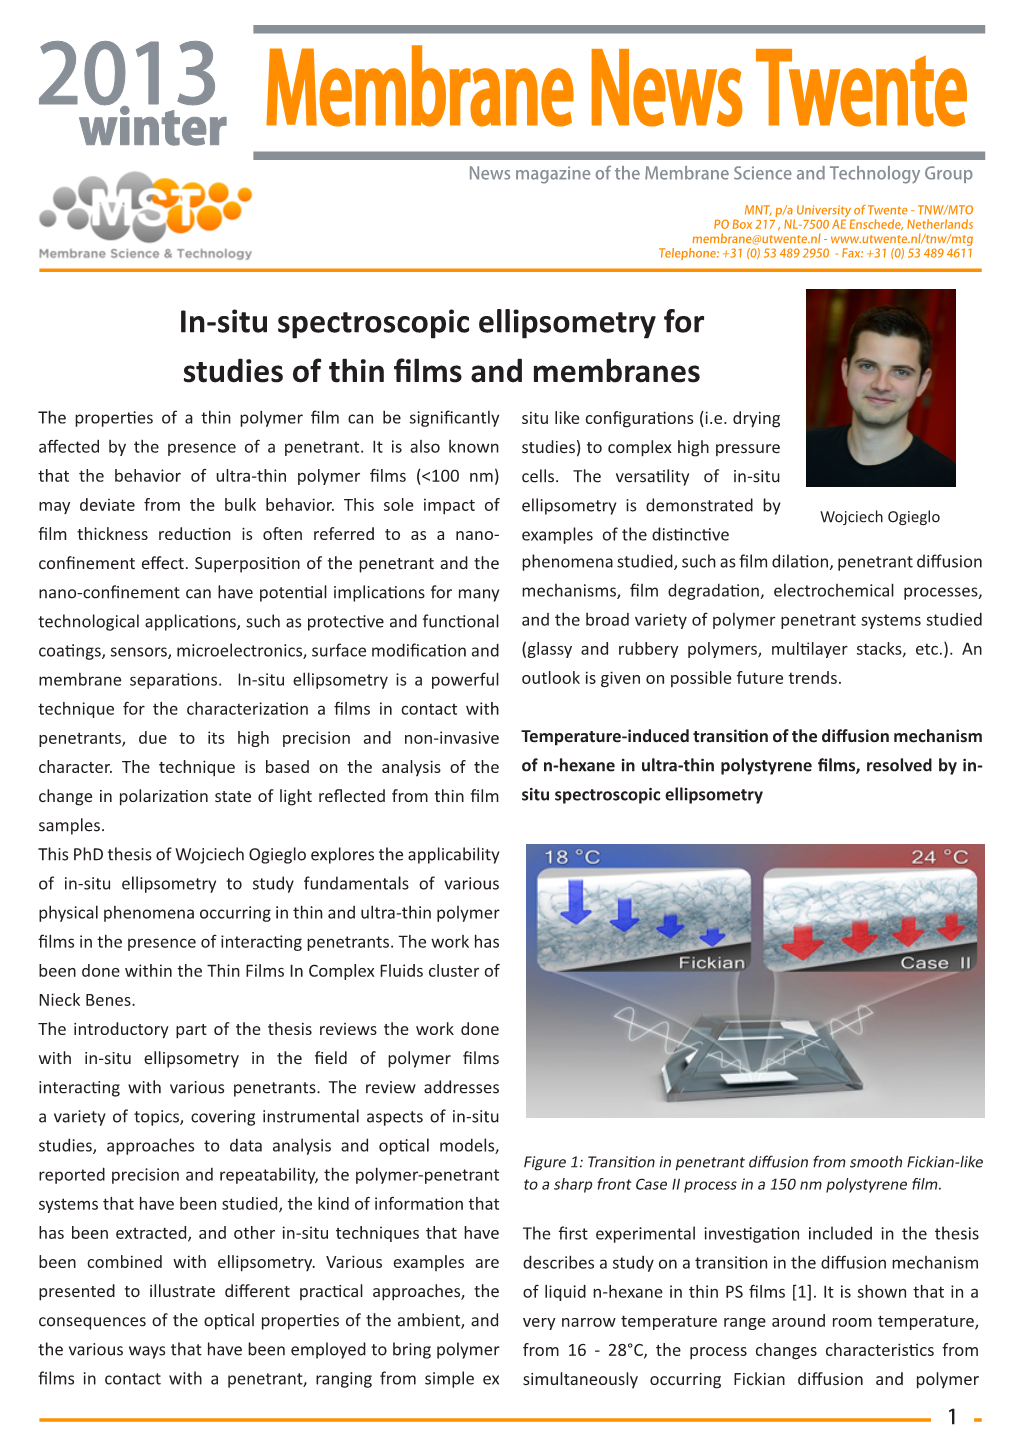 In-Situ Spectroscopic Ellipsometry for Studies of Thin Films and Membranes the Properties of a Thin Polymer Film Can Be Significantly Situ Like Configurations (I.E